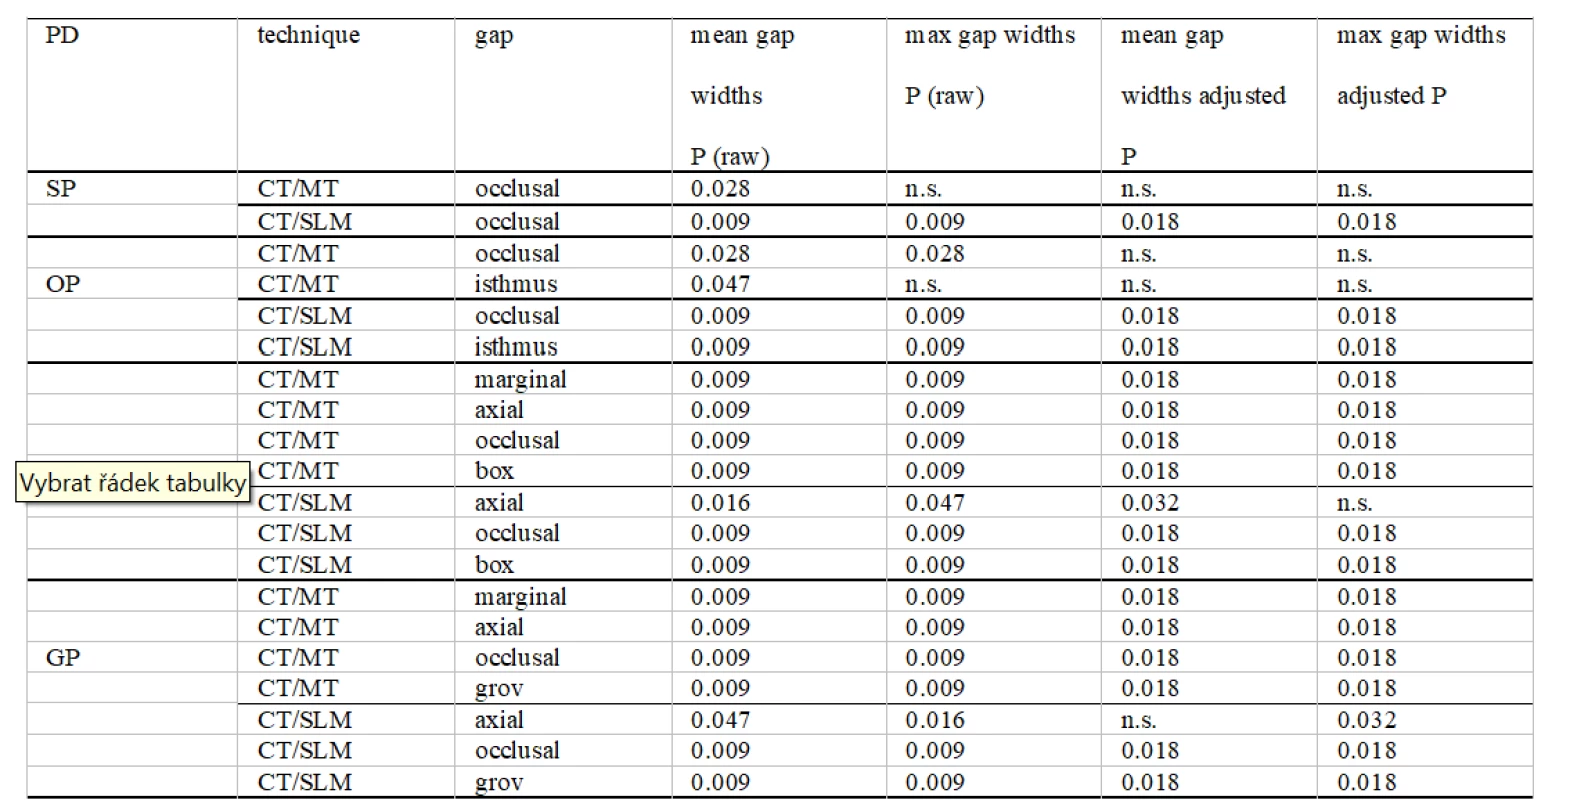 Statistical comparison of gap widths (U-test) with raw and adjusted (Bonferroni) P values ≤ 0.05